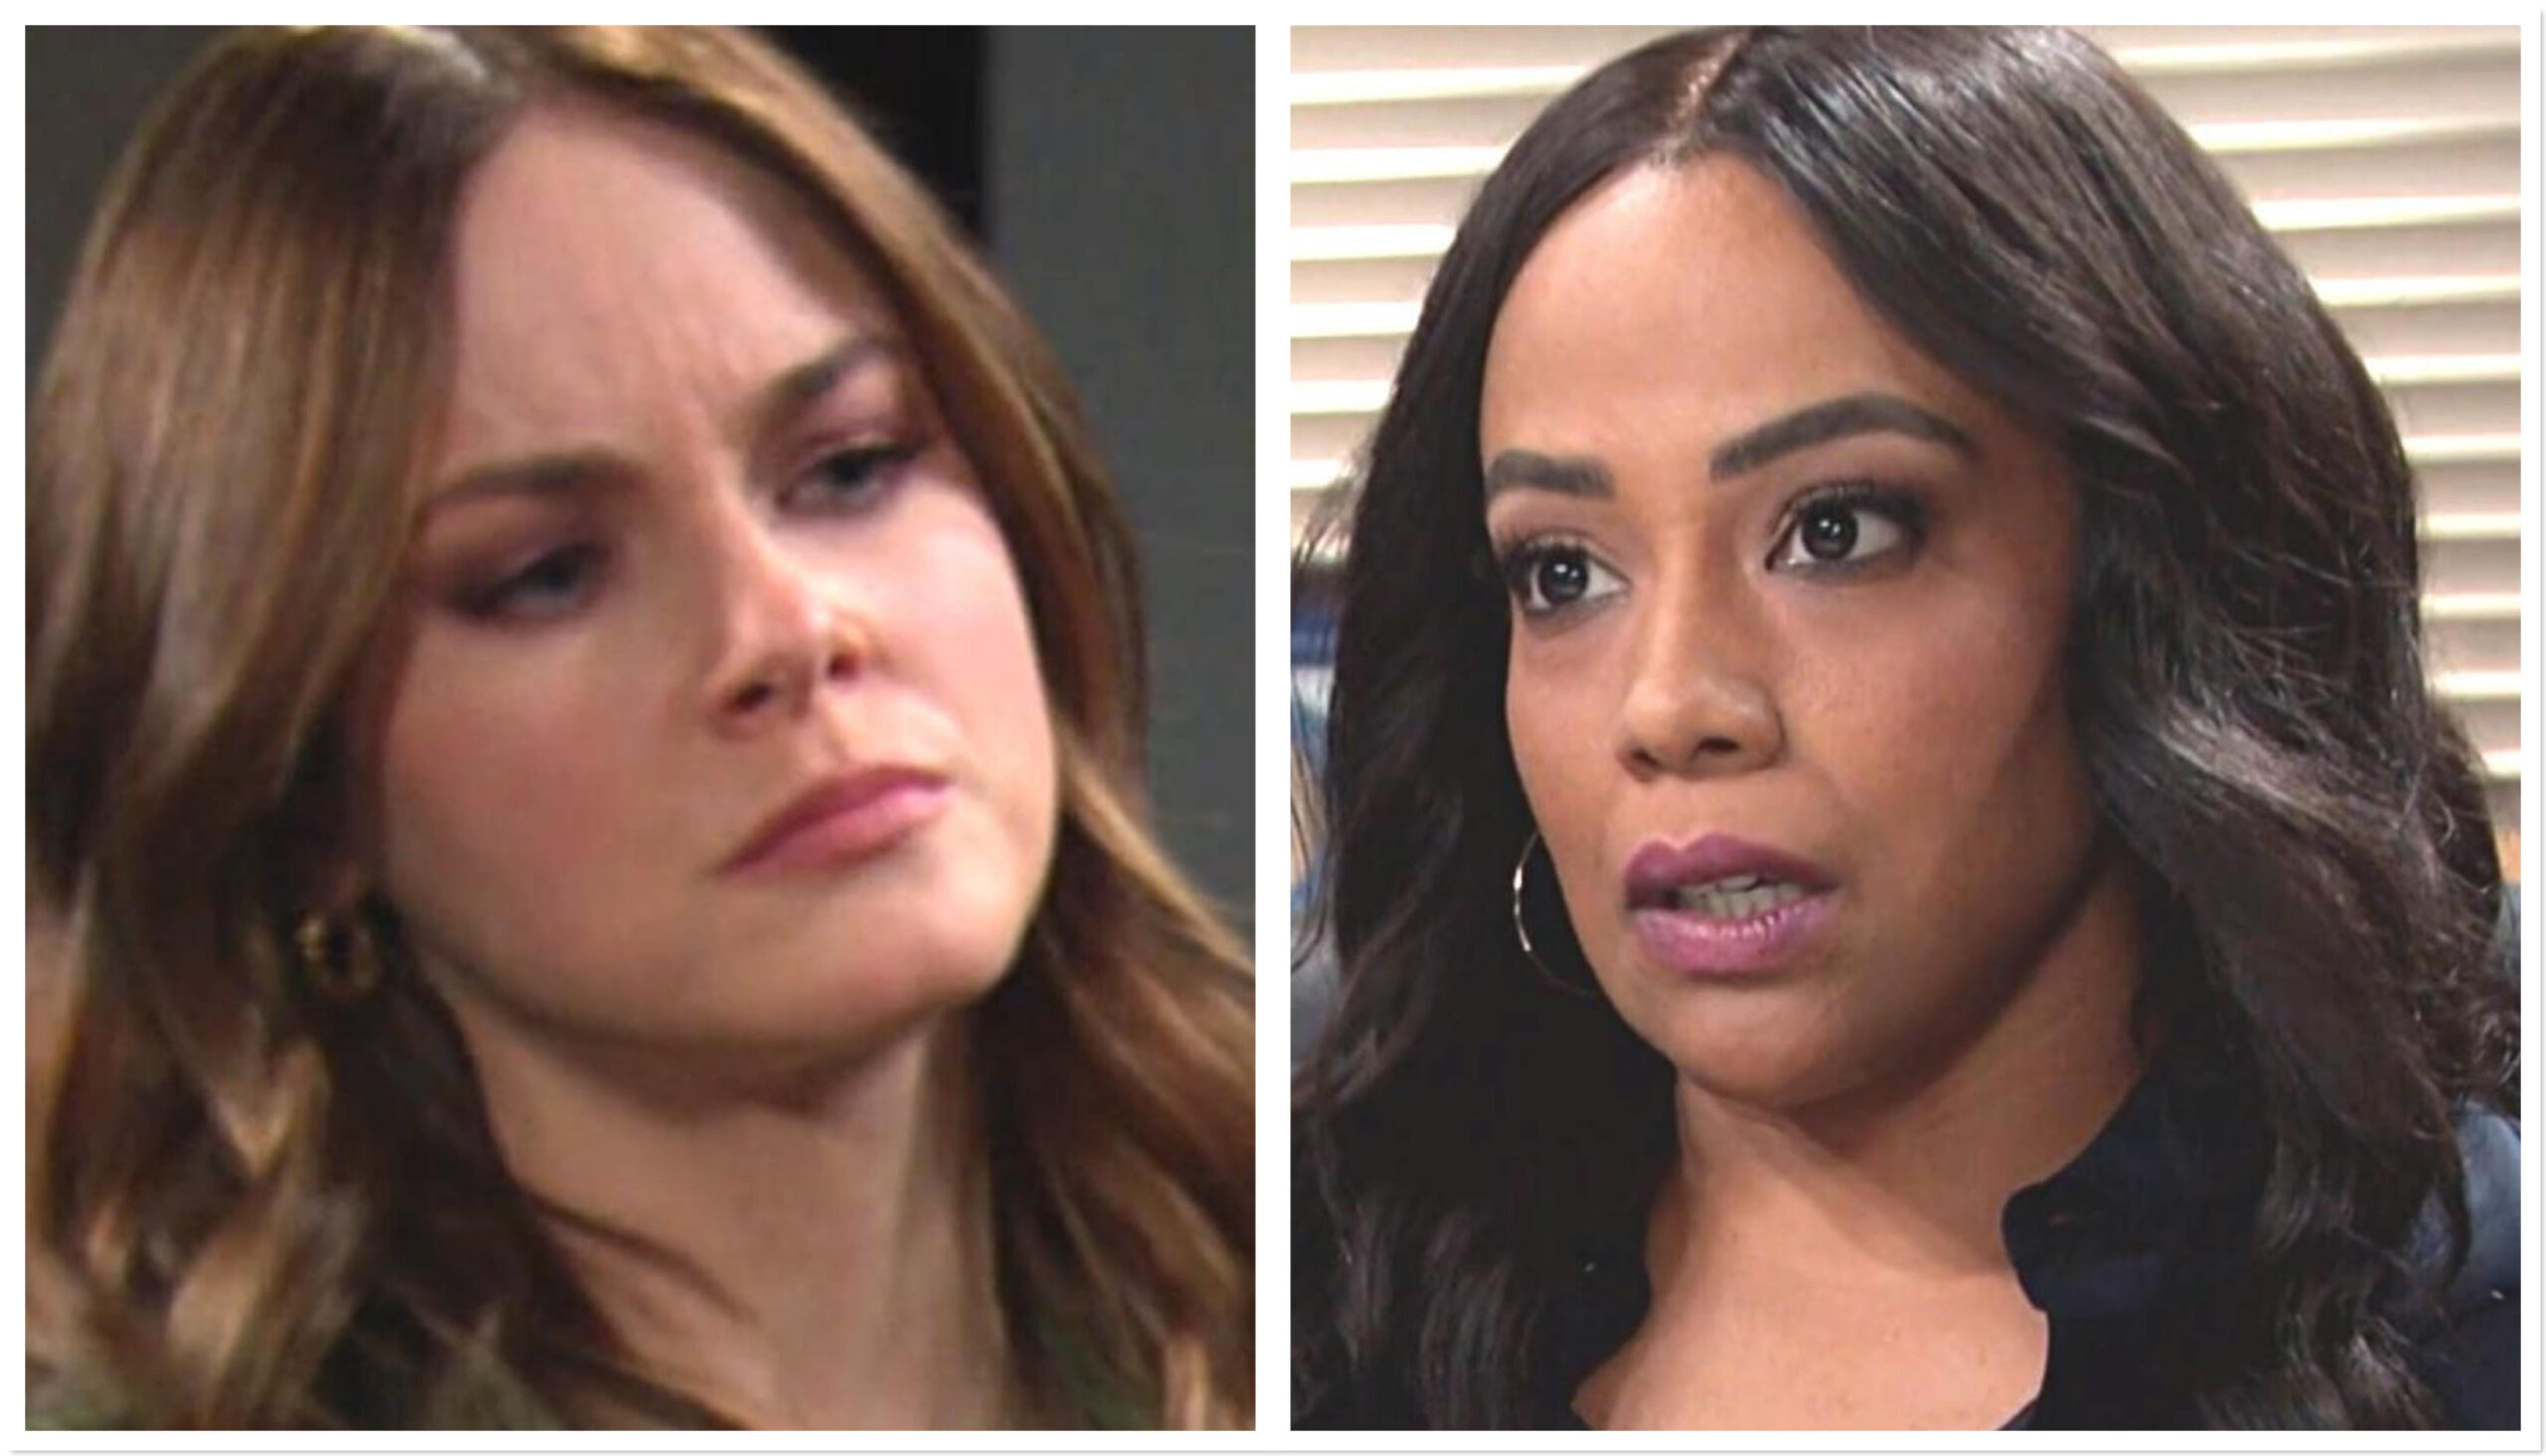 Days of Our Lives Spoilers featuring Stephanie Johnson with a thoughtful expression and Jada Hunter looking contemplative